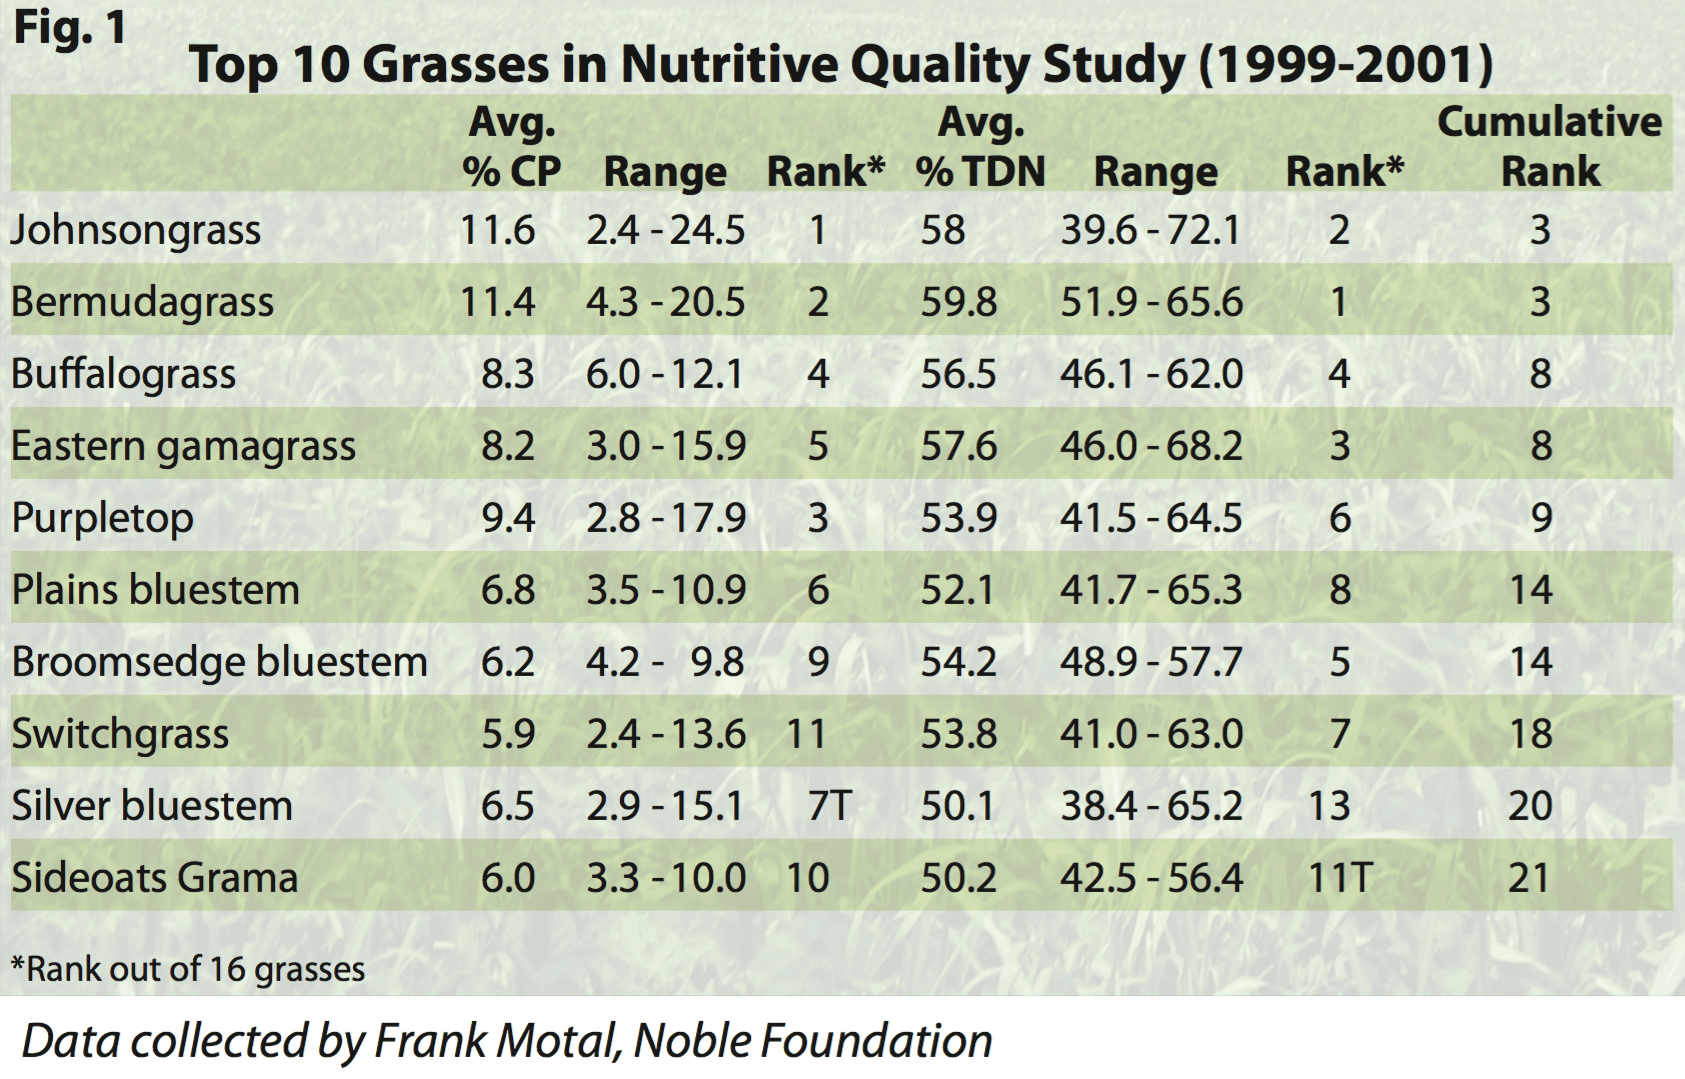 Fig. 1. Top 10 grasses in nutritive quality study (1999-2001)